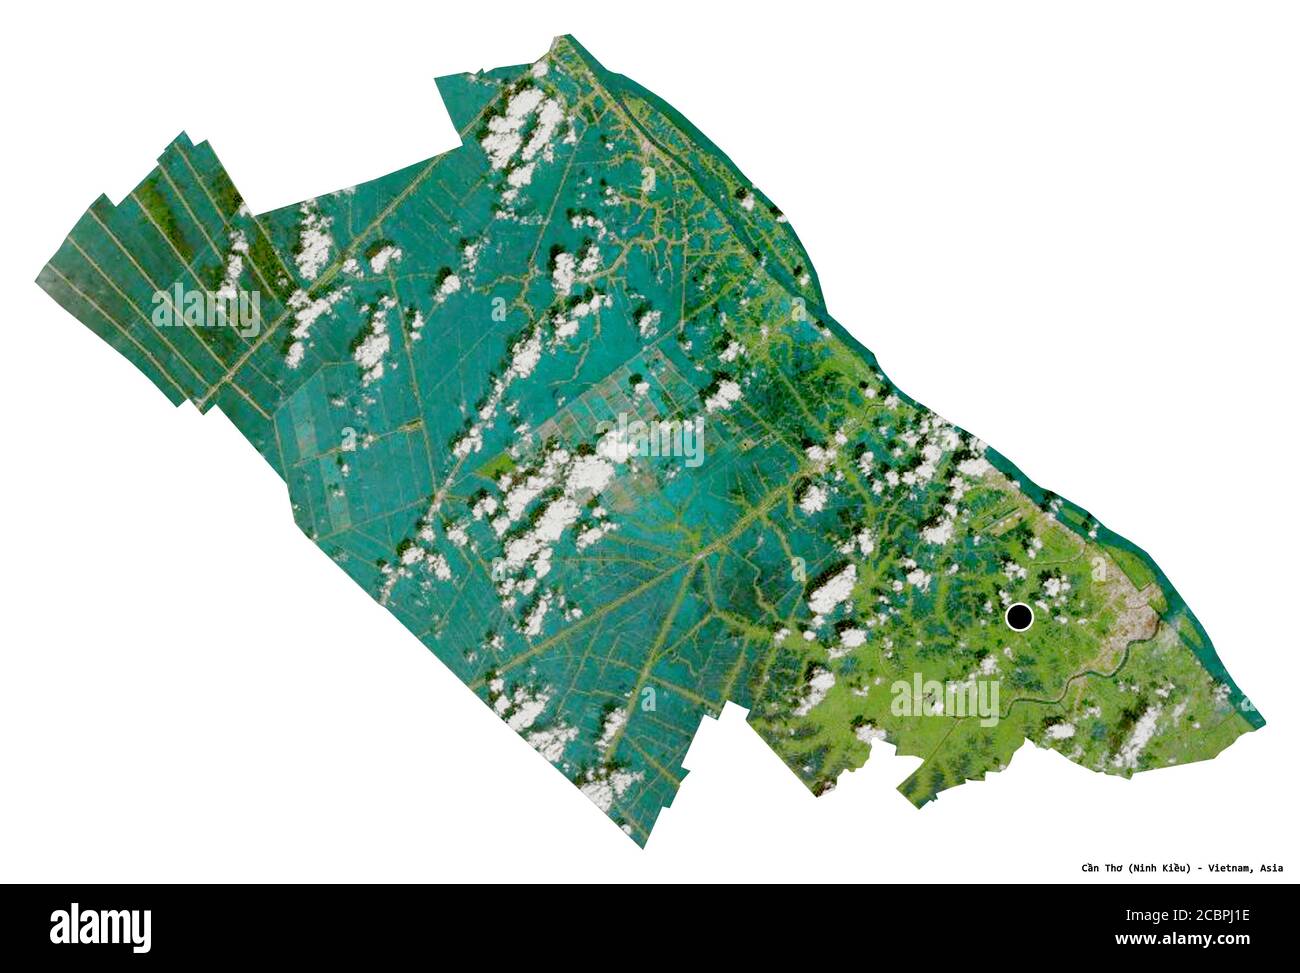 Shape of Cần Thơ, city of Vietnam, with its capital isolated on white background. Satellite imagery. 3D rendering Stock Photo